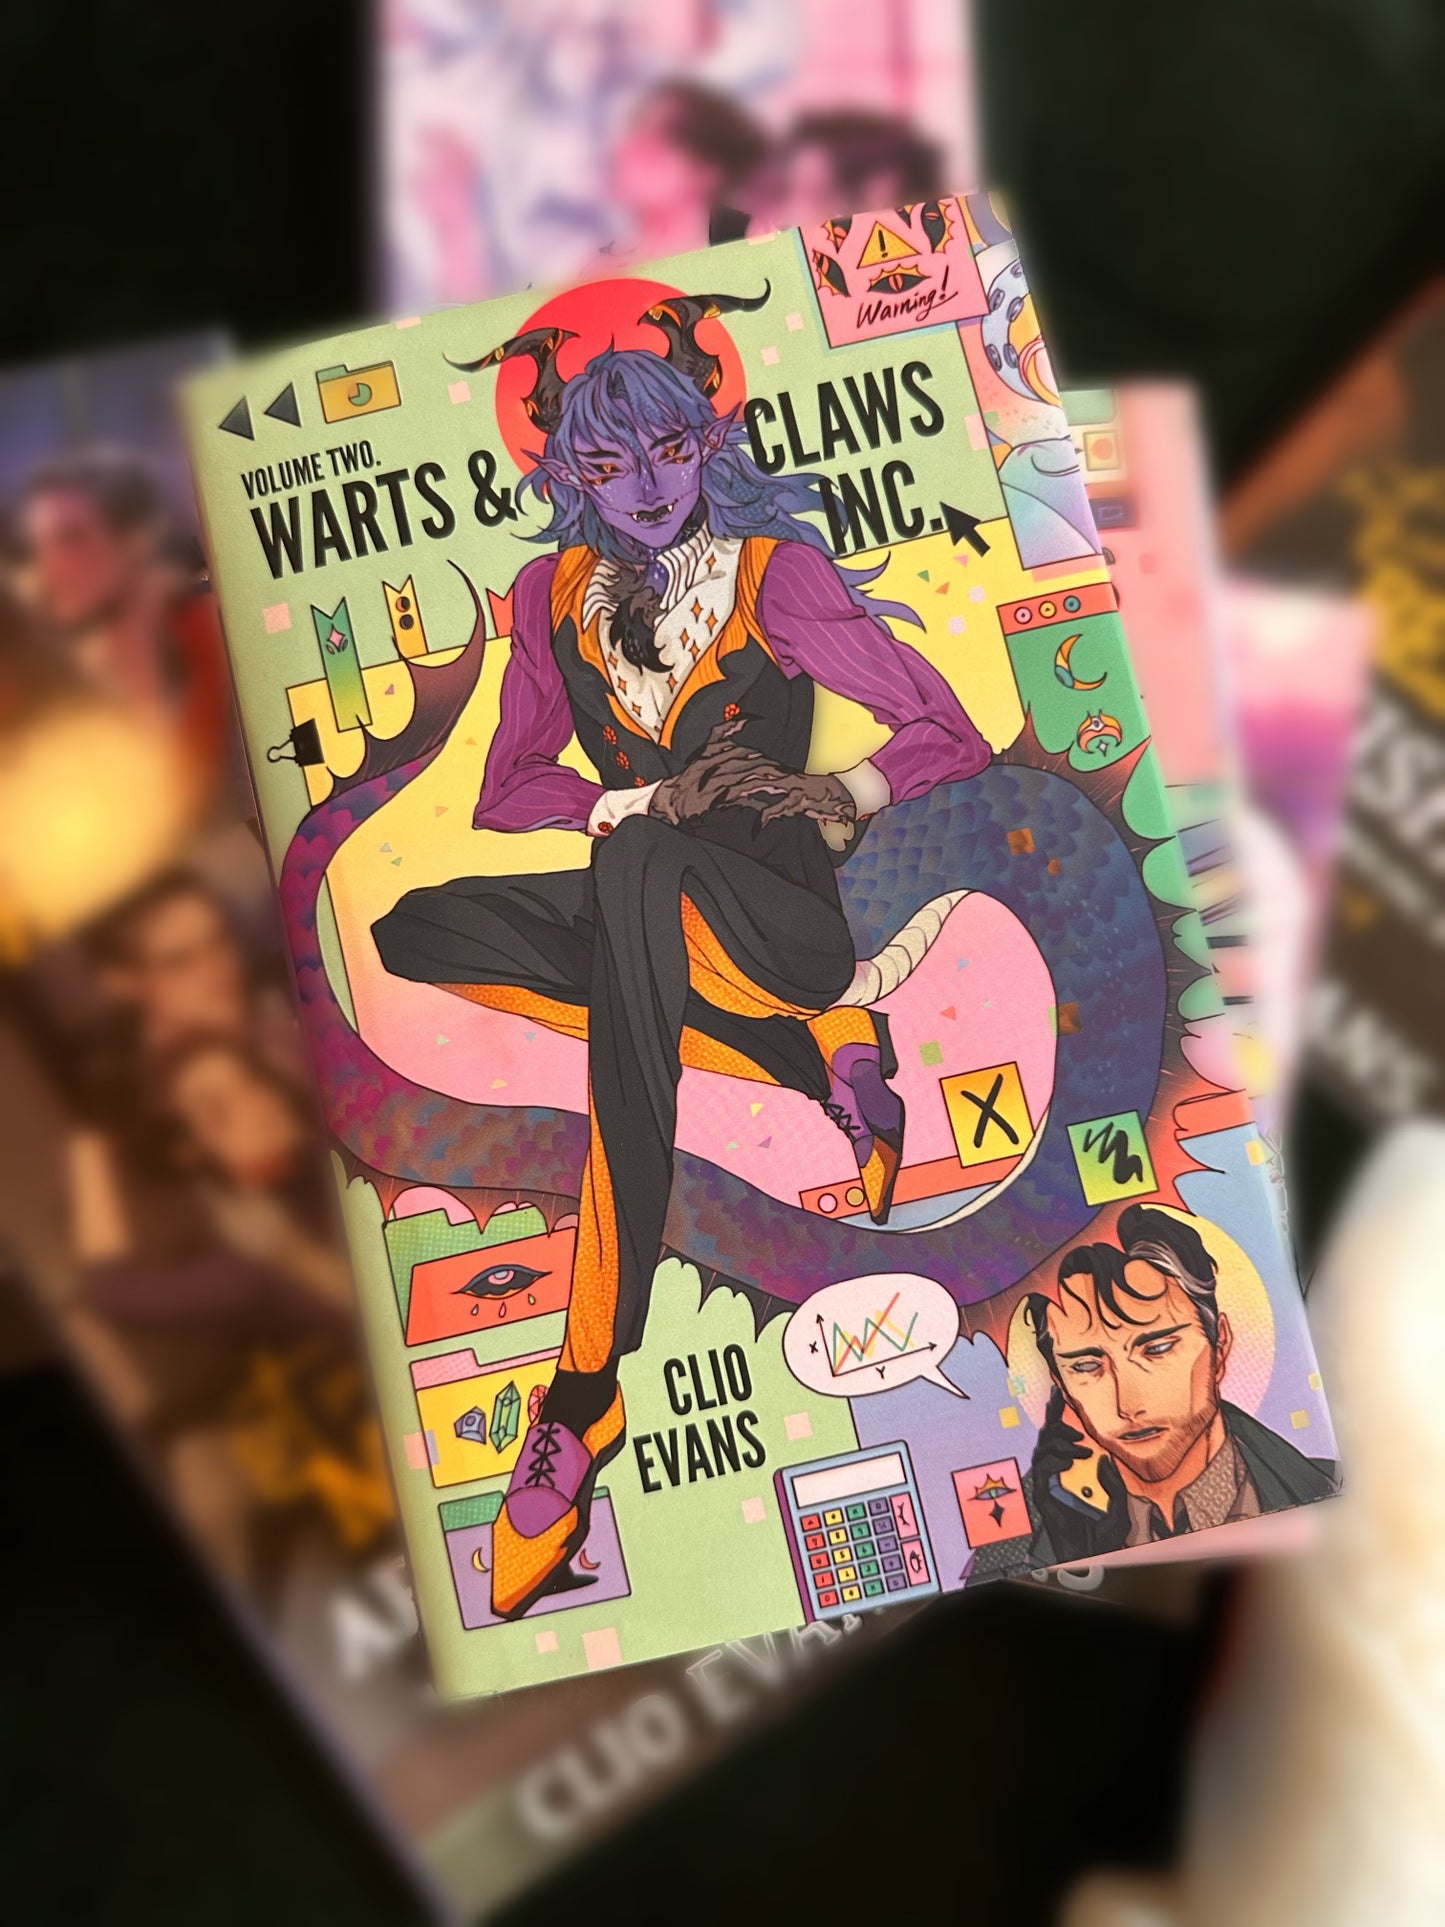 Warts & Claws Volumes 1 and 2 Preorder (Open until June 17th)